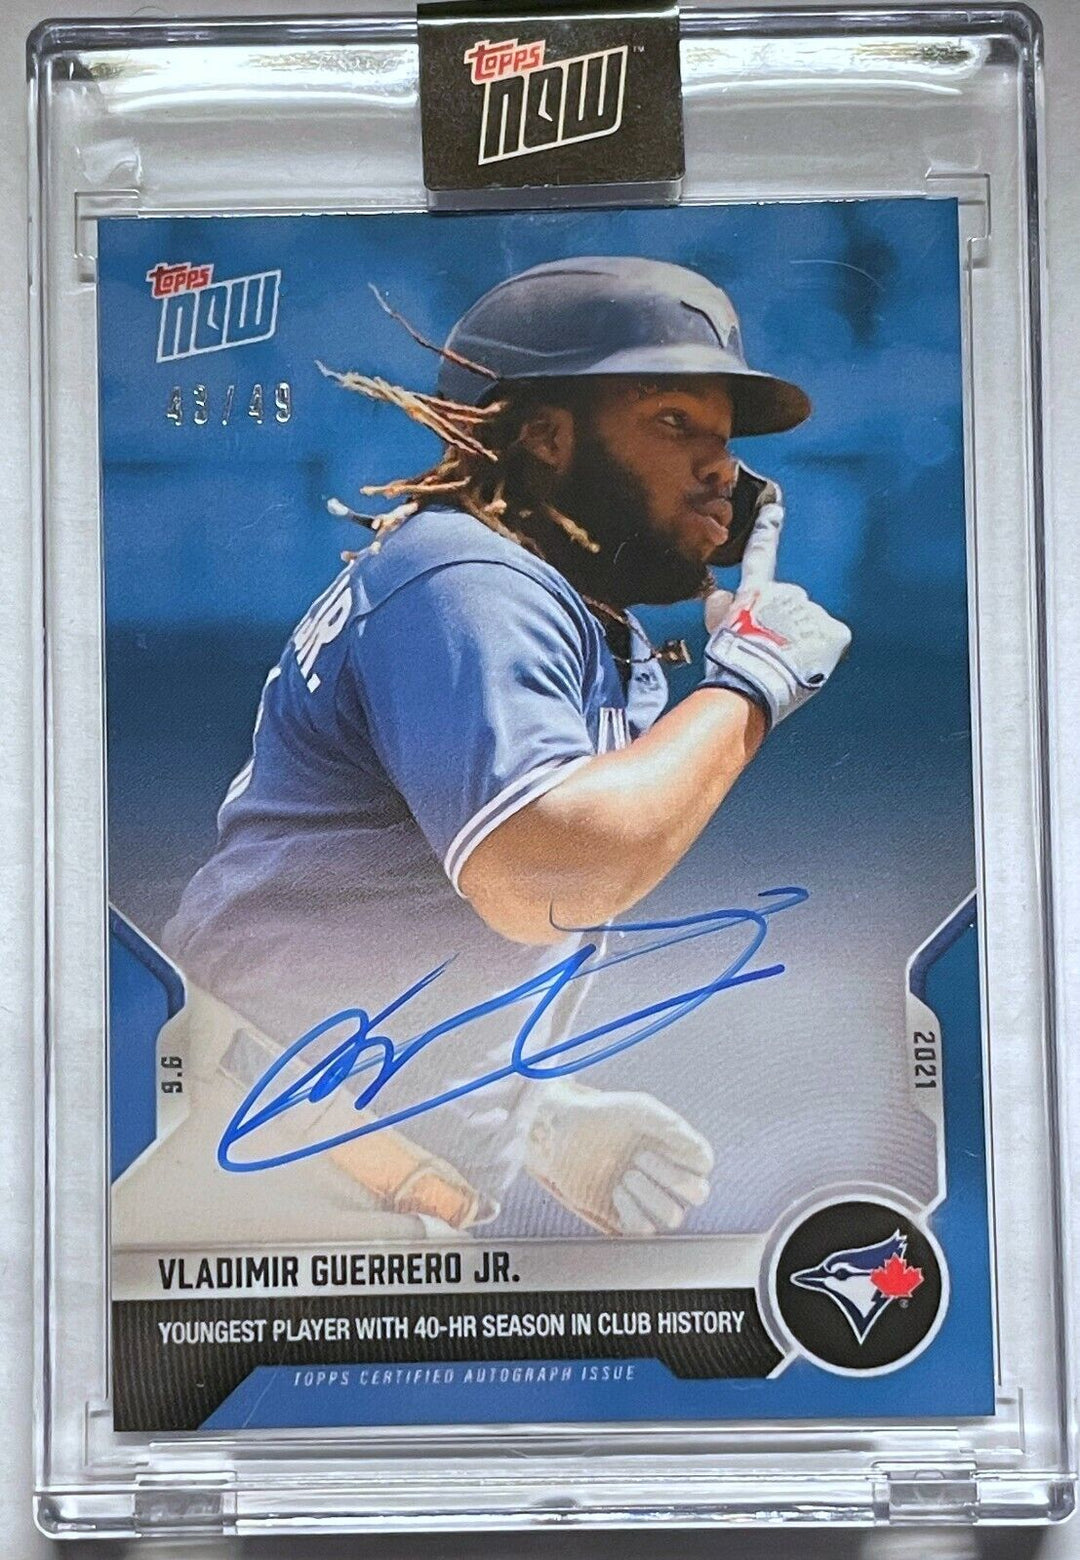 2021 VLADIMIR GUERRERO JR SIGNED YOUNGEST 40 HR SEASON TOPPS NOW AUTO CARD #767B Image 8